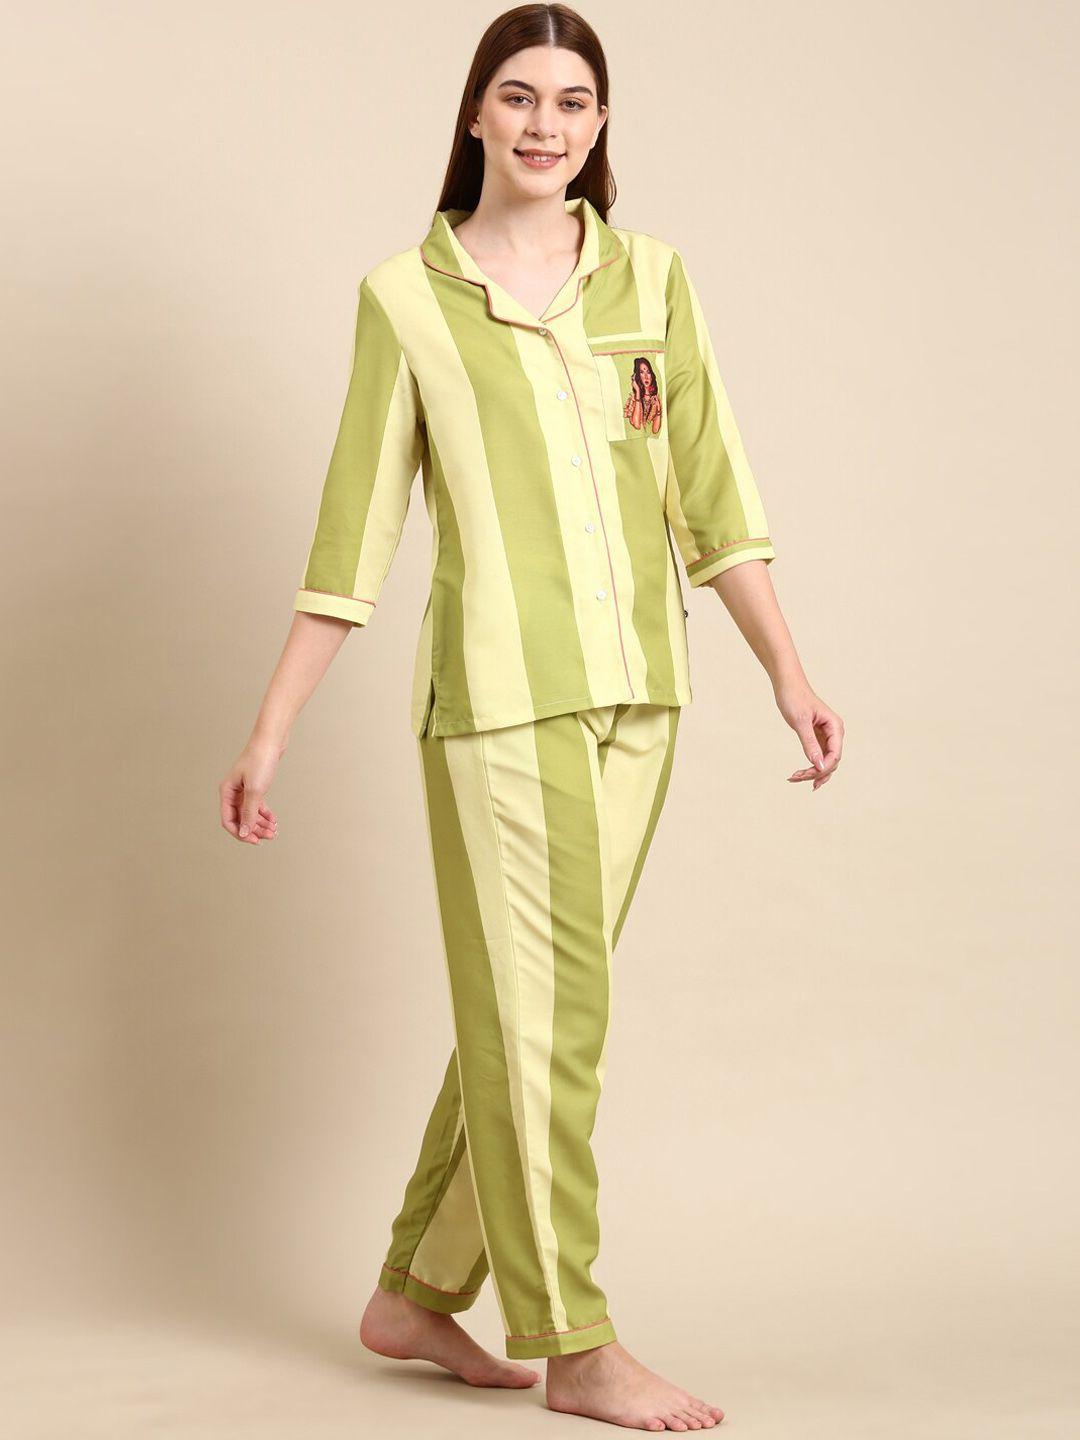 bannos swagger green & beige striped night suit